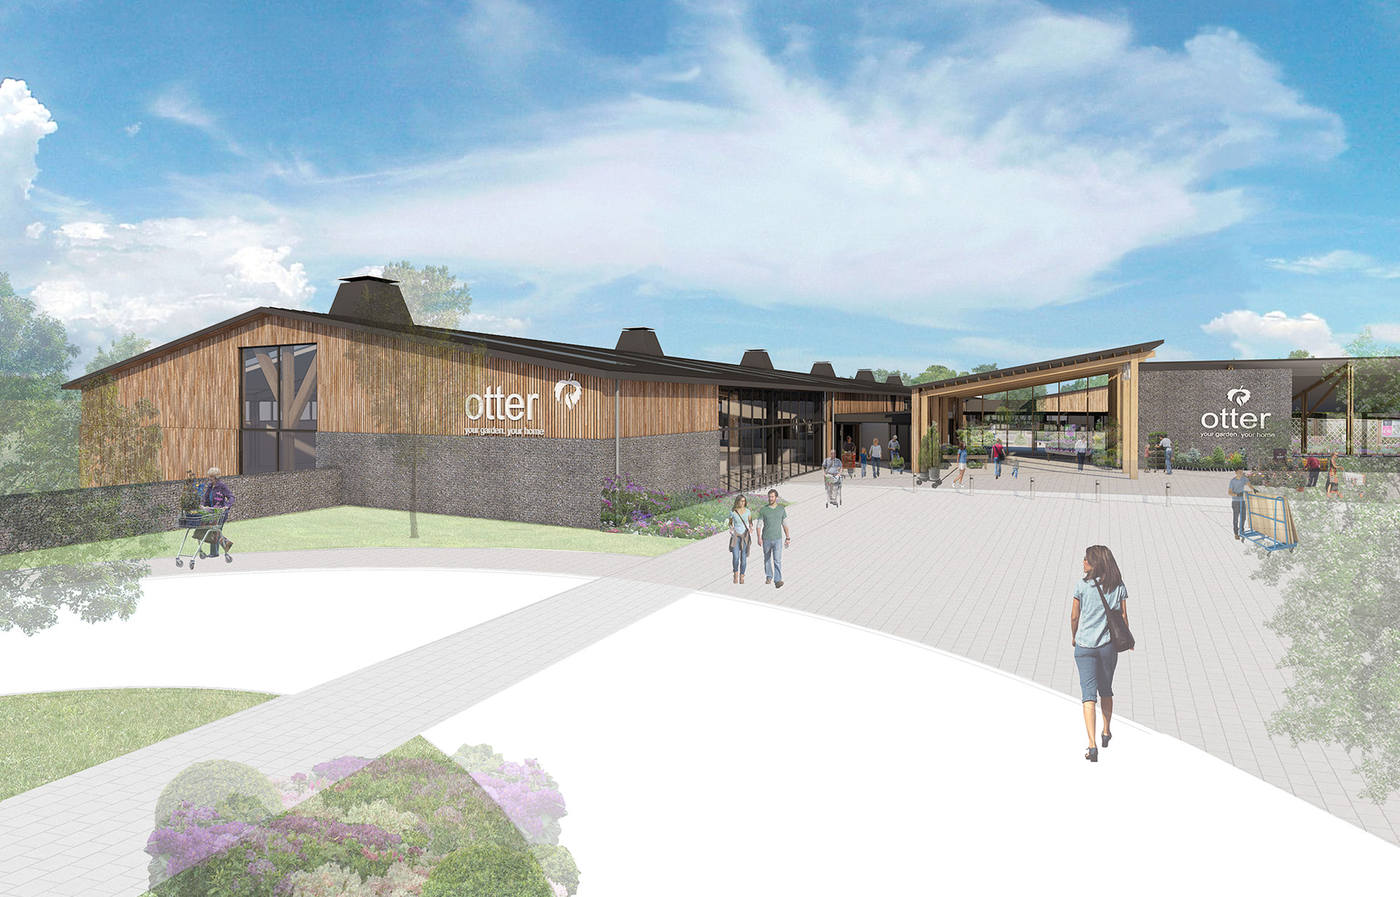 First Image of Otter Nurseries - Torbay